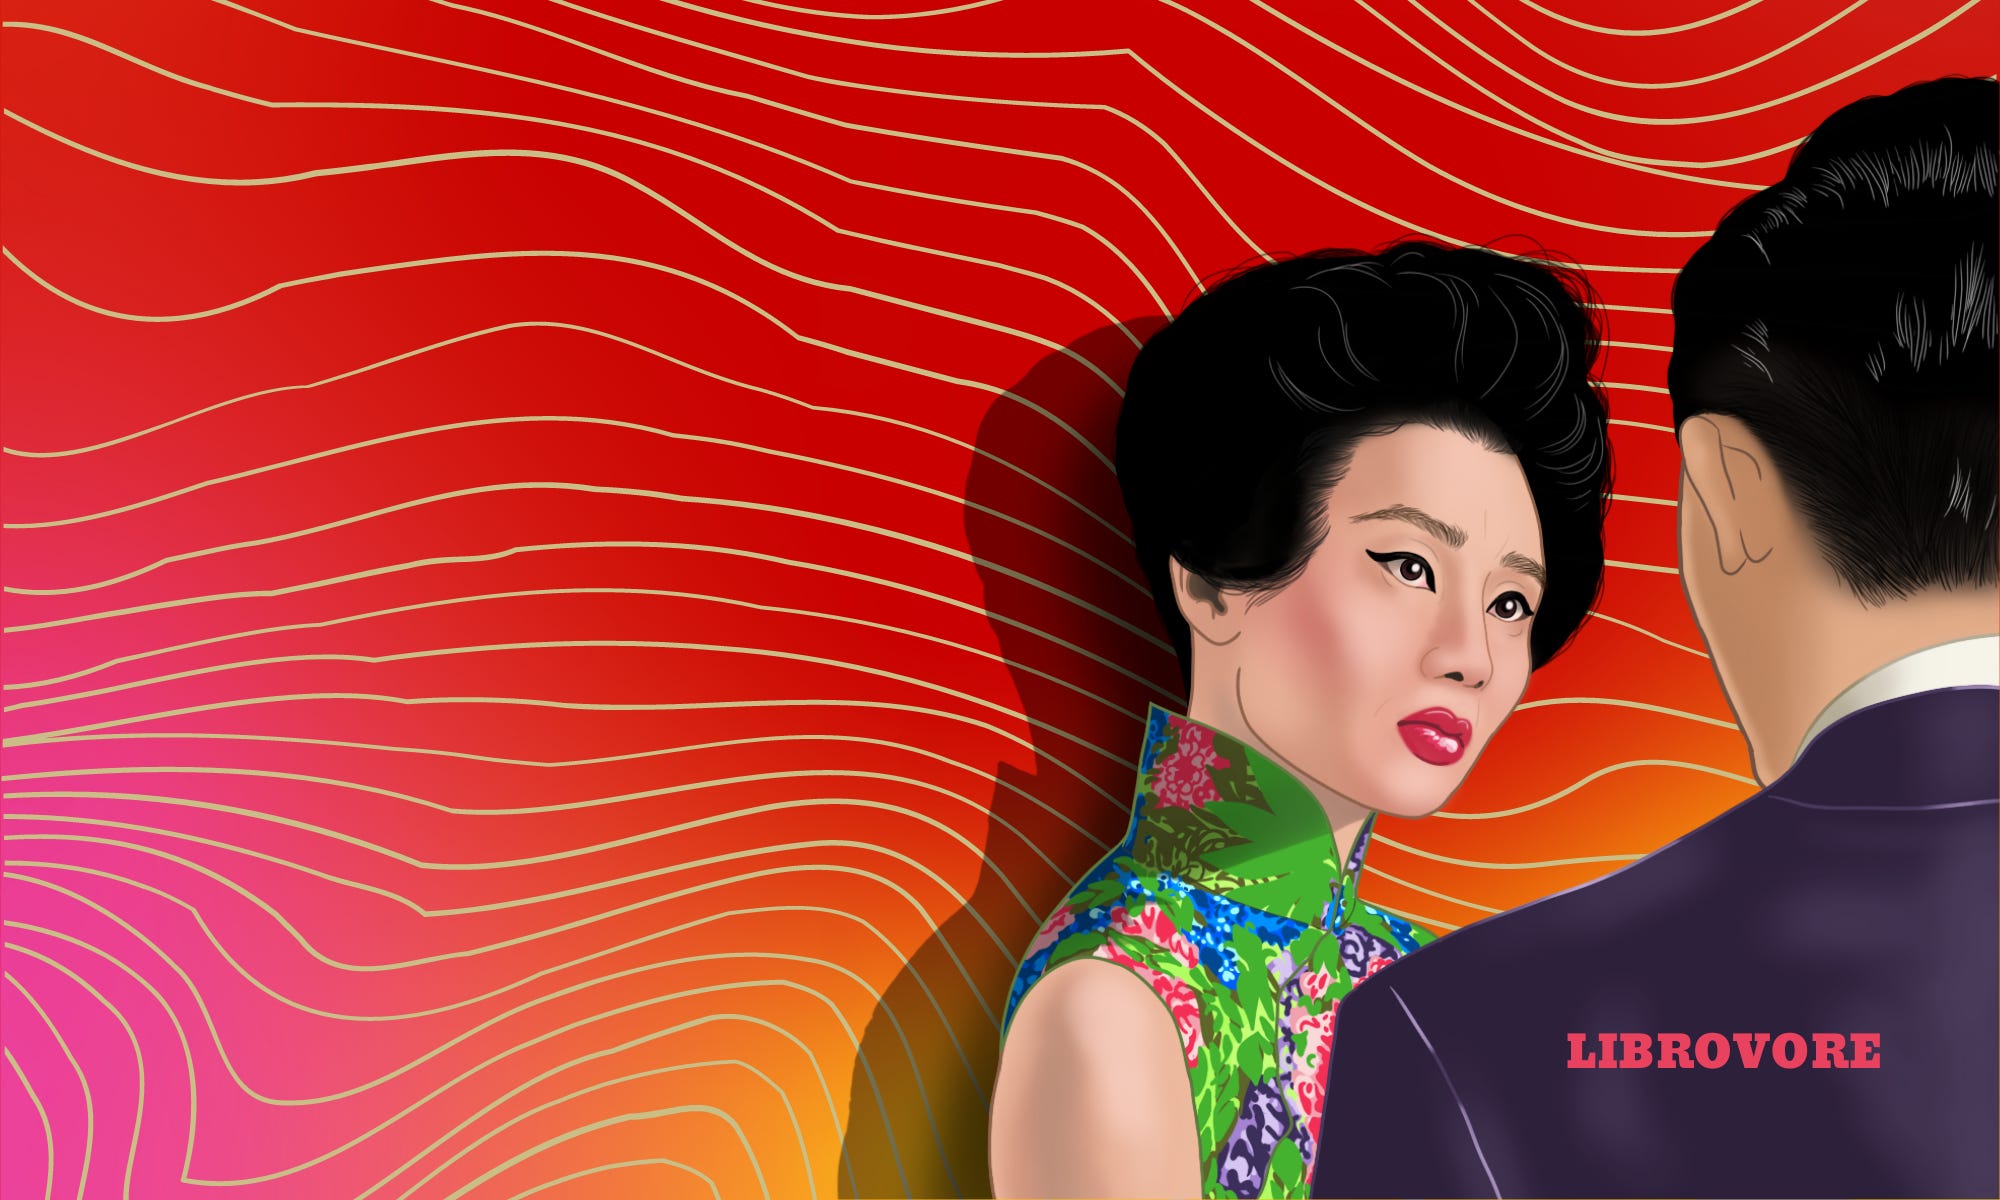 illustration of Chinese man and woman staring intensely at each other with an abstract red background